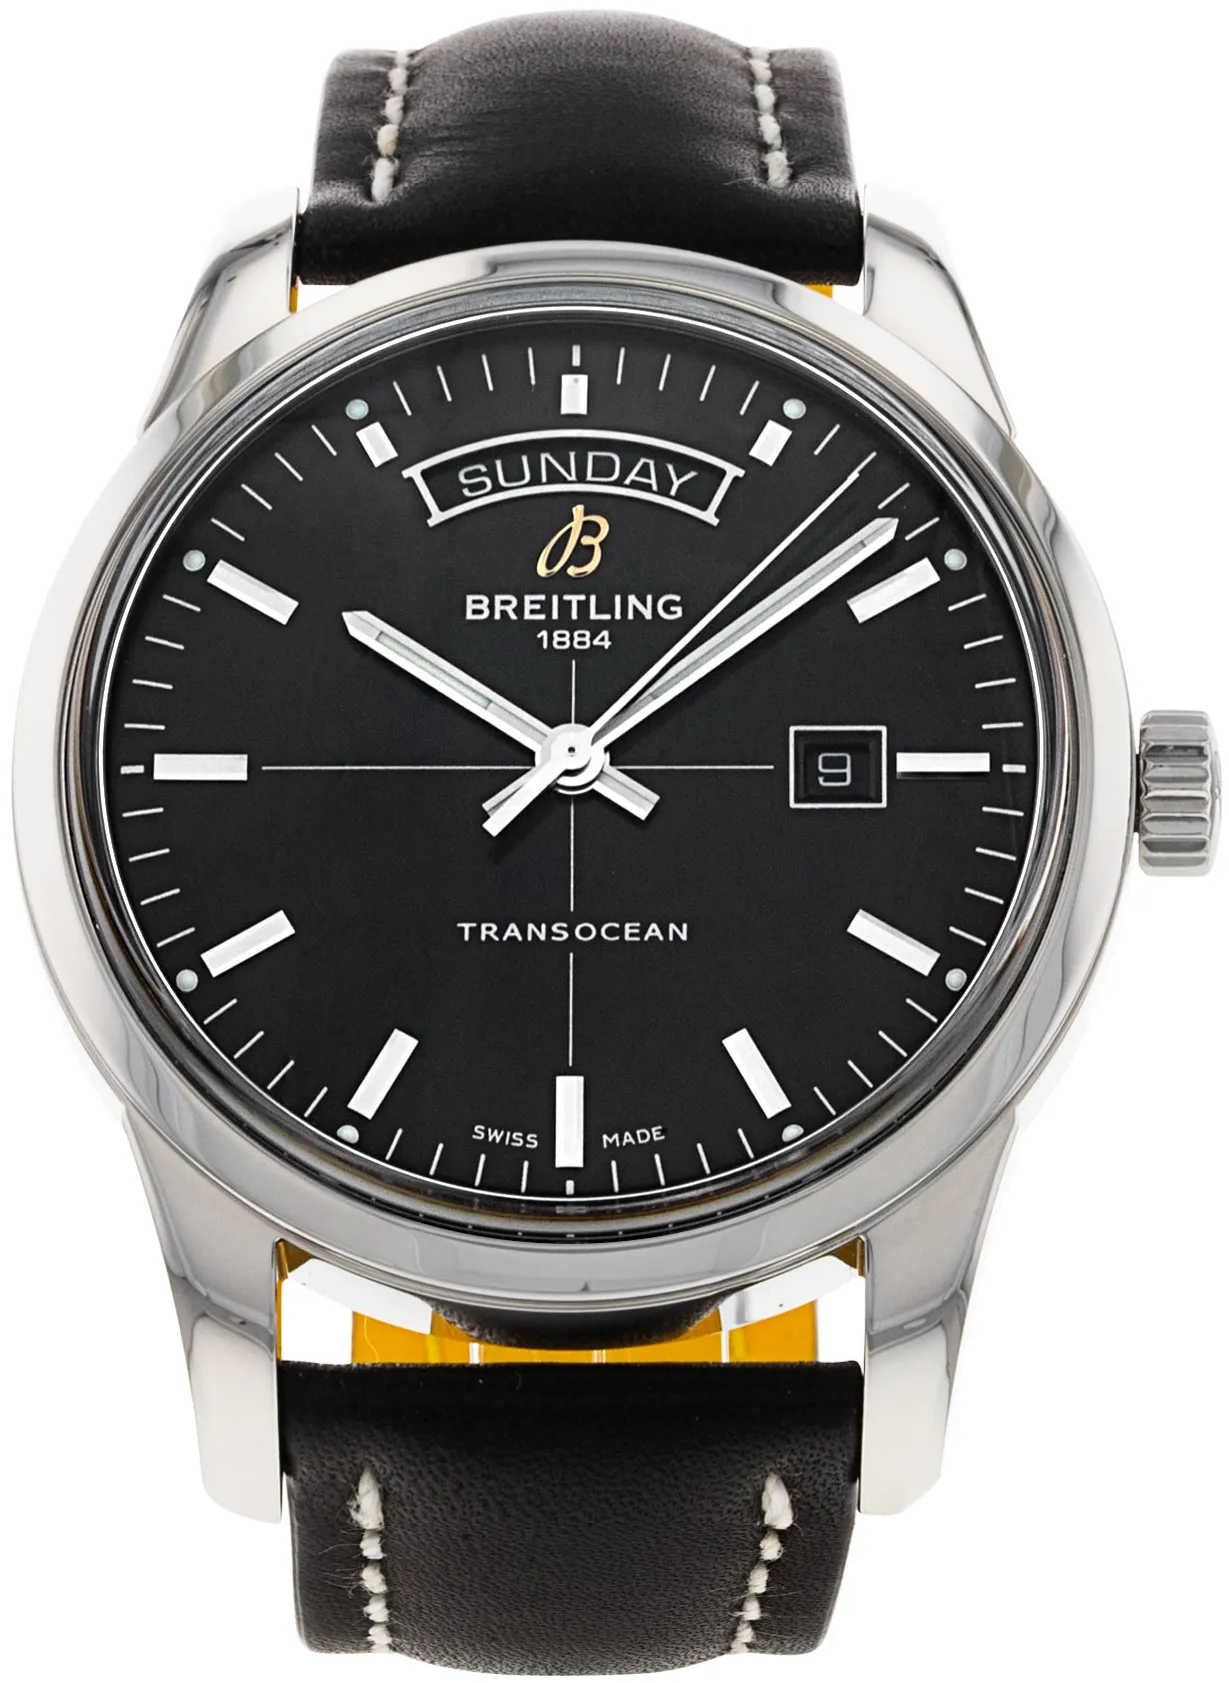 Breitling Transocean A45310 43mm Stainless steel